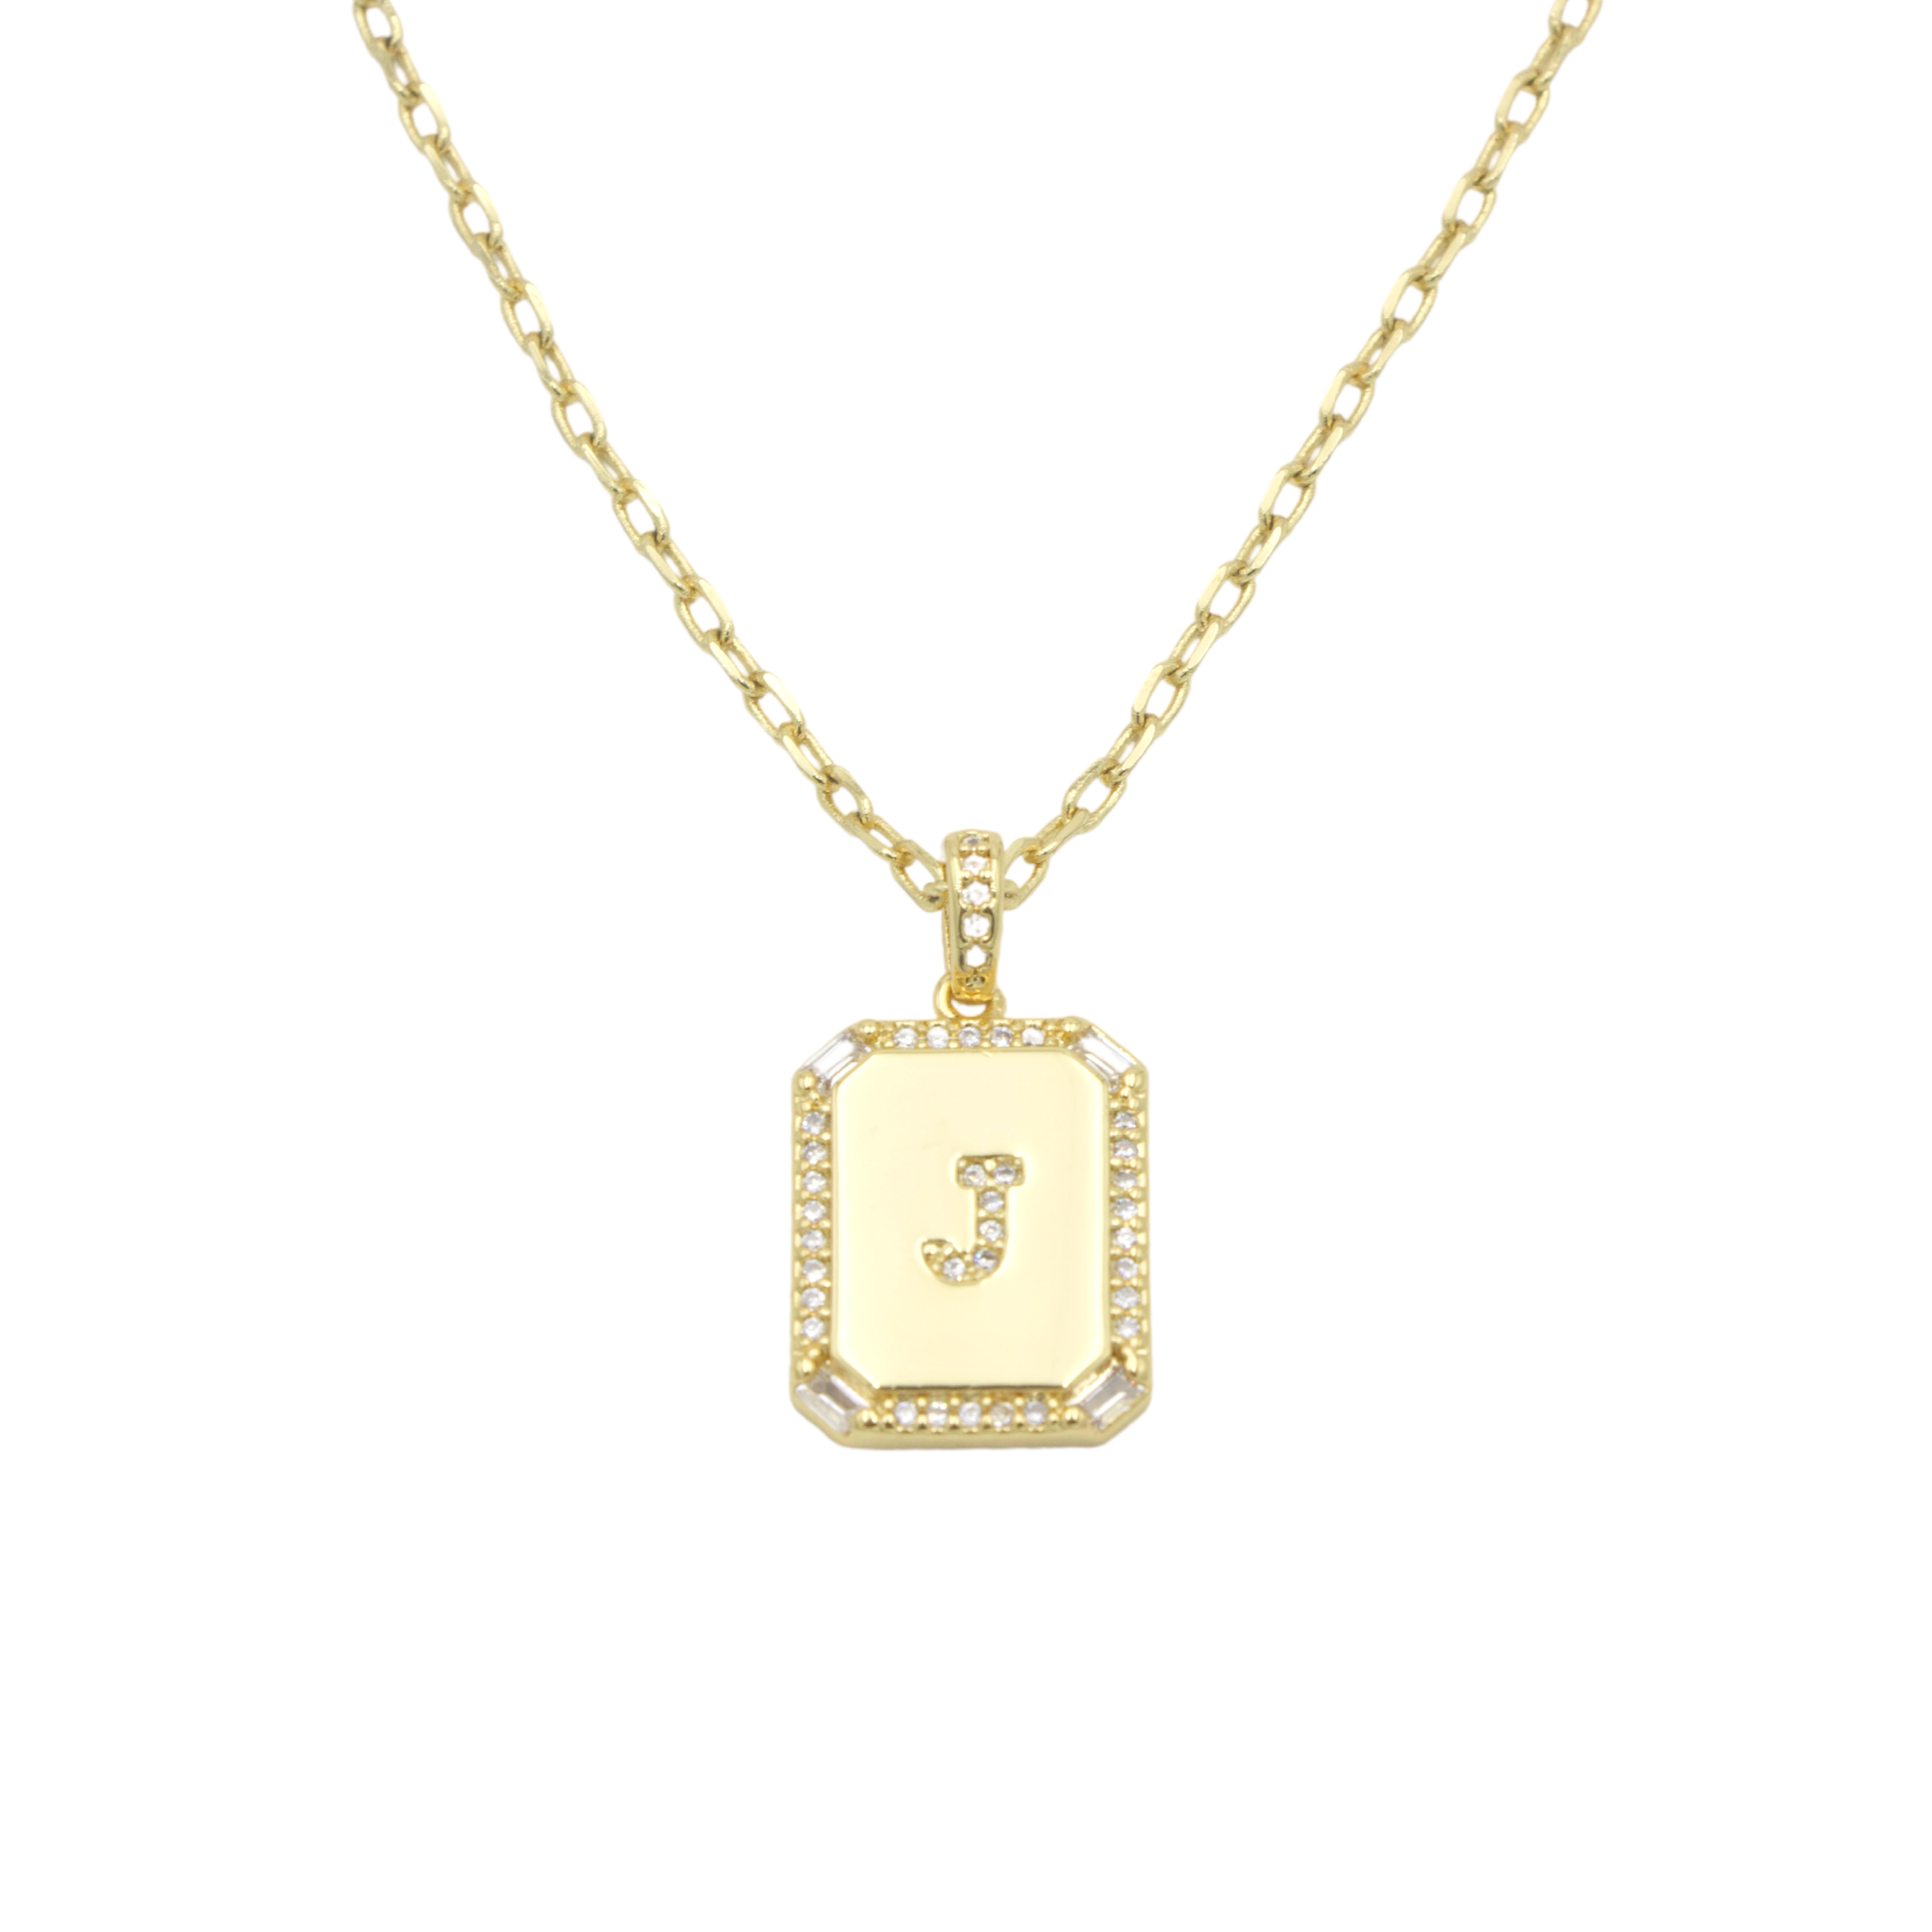 AW Boutique's gold filled 16 inch cable chain necklace finished with a dainty initial pendant with cubic zirconia detail. J initial shown.